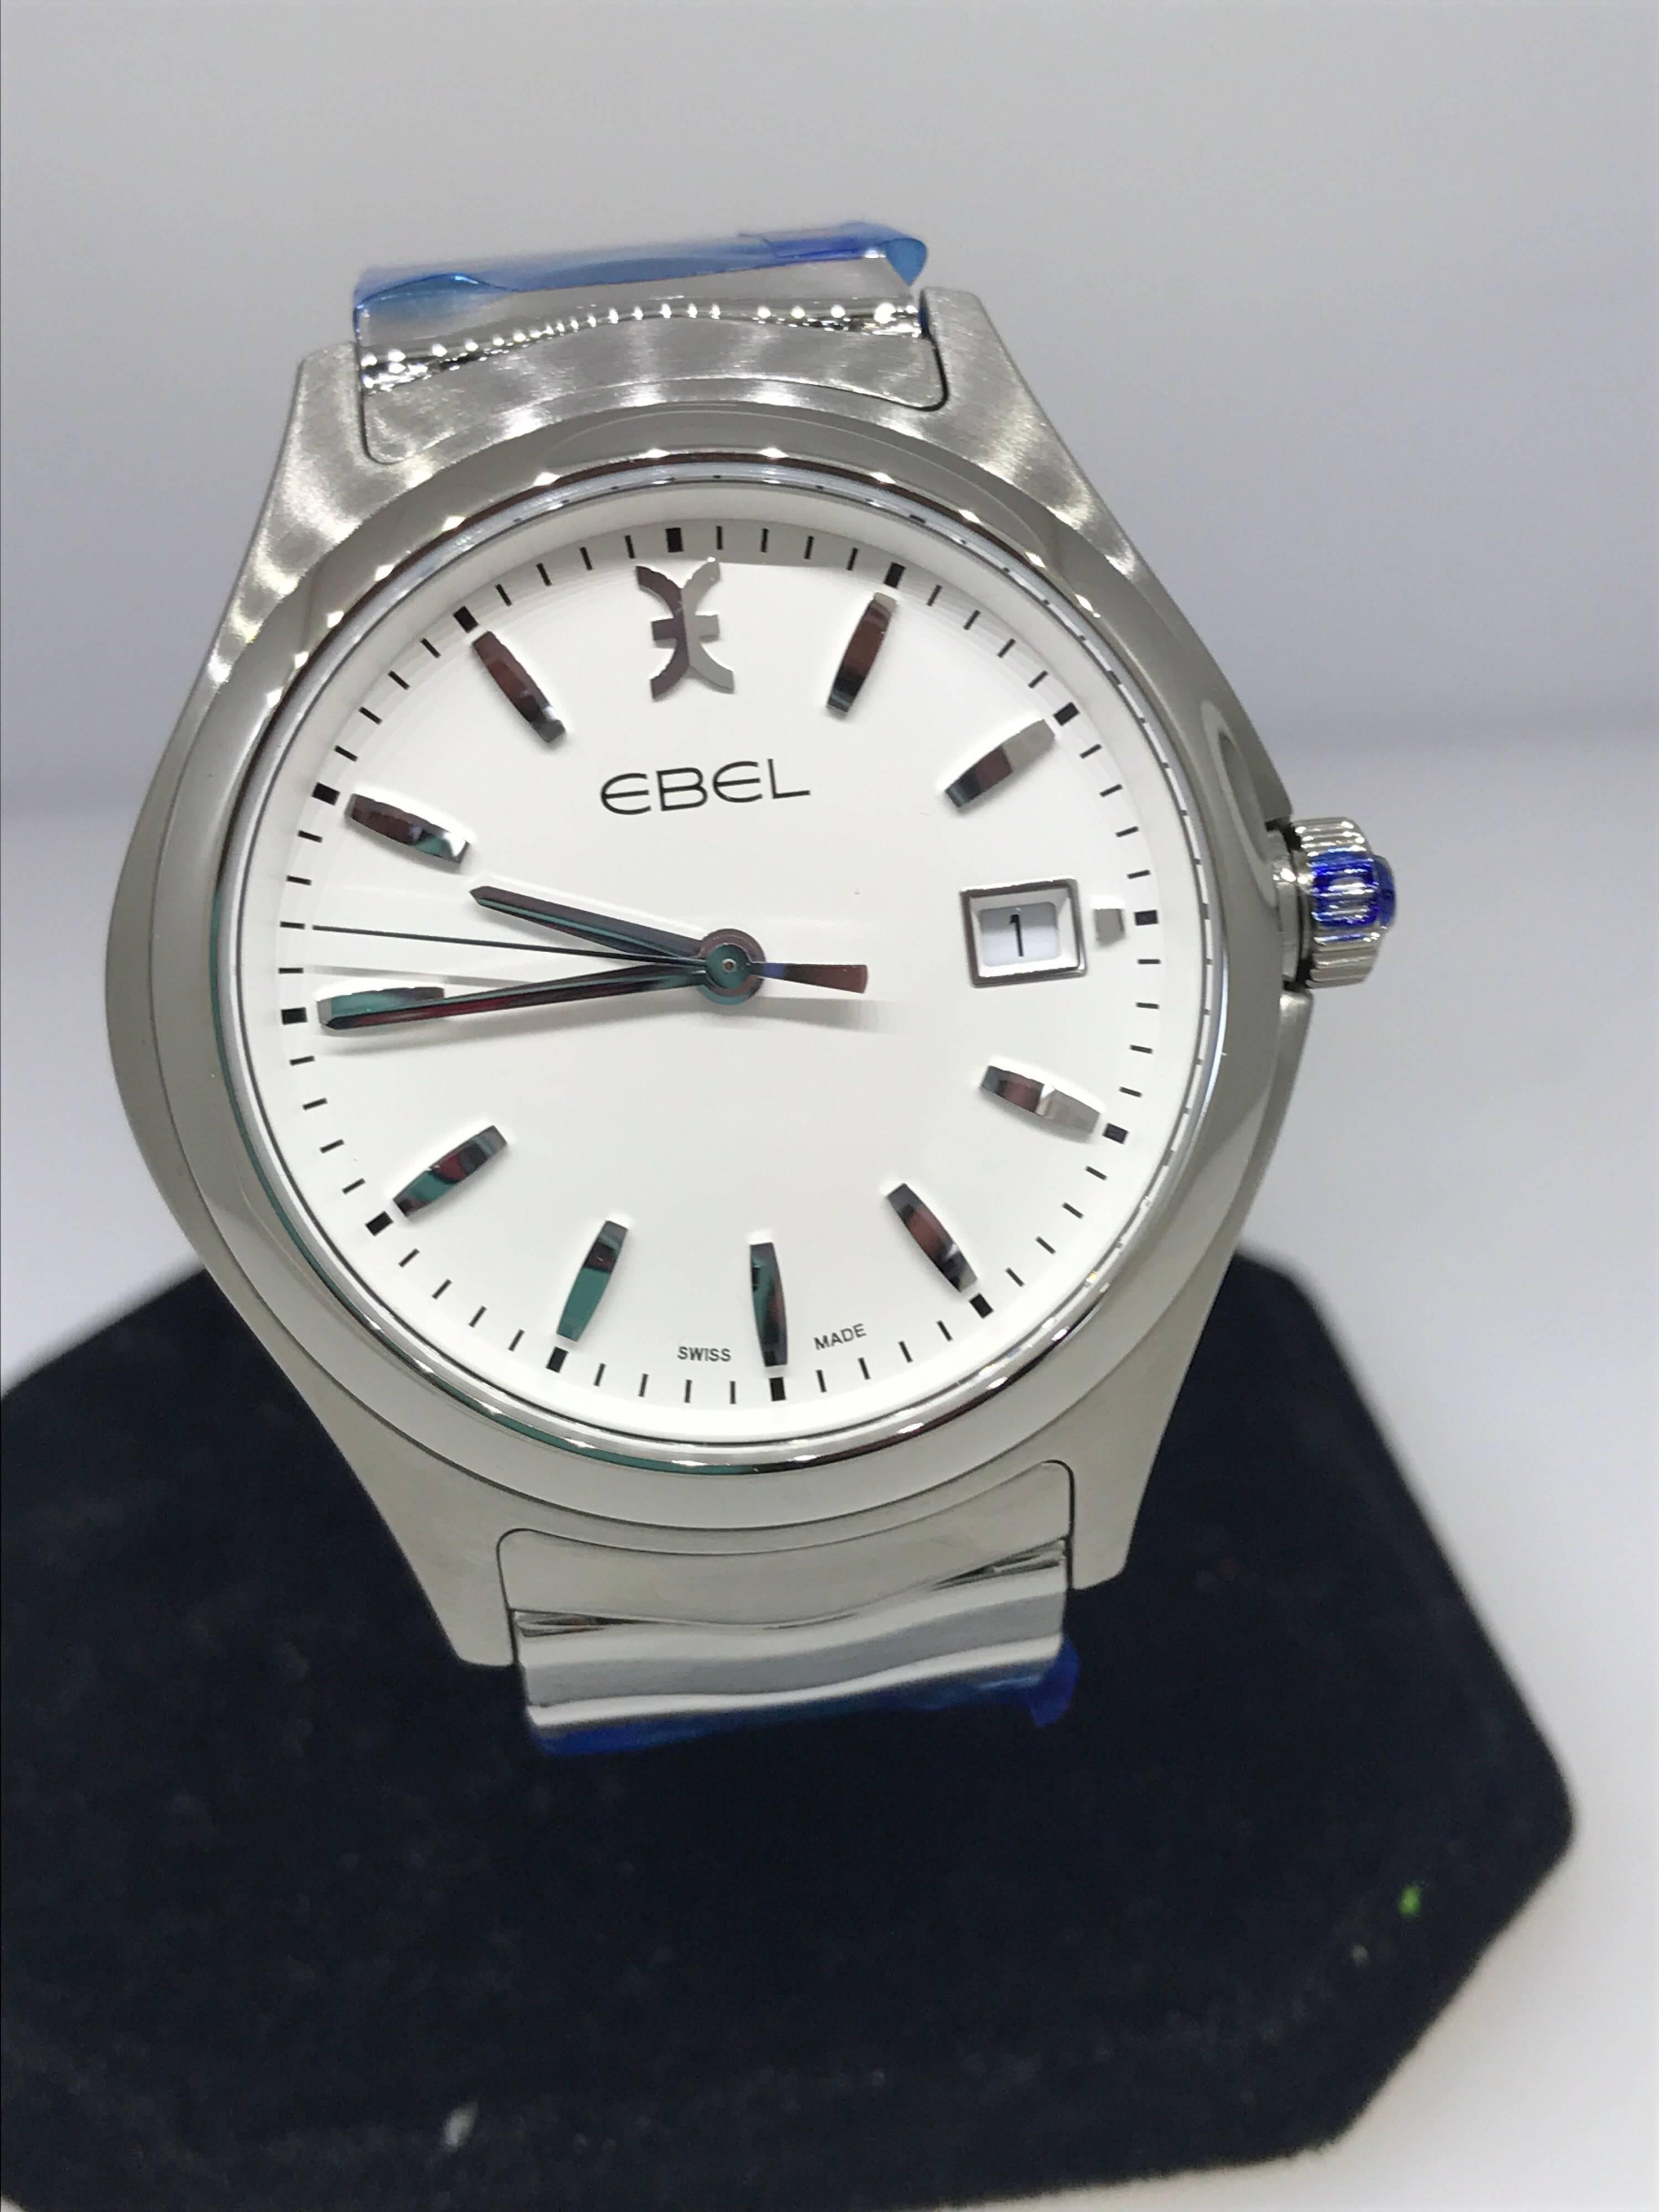 Ebel Wave Men's Watch

Model Number: 1216201

100% Authentic

Brand New

Comes with original Ebel box, warranty card and instruction manual

Stainless Steel Case & Braclet

White Dial

Date Indicator

Case Size: 40mm

Case Thickness: 10.5mm

Water